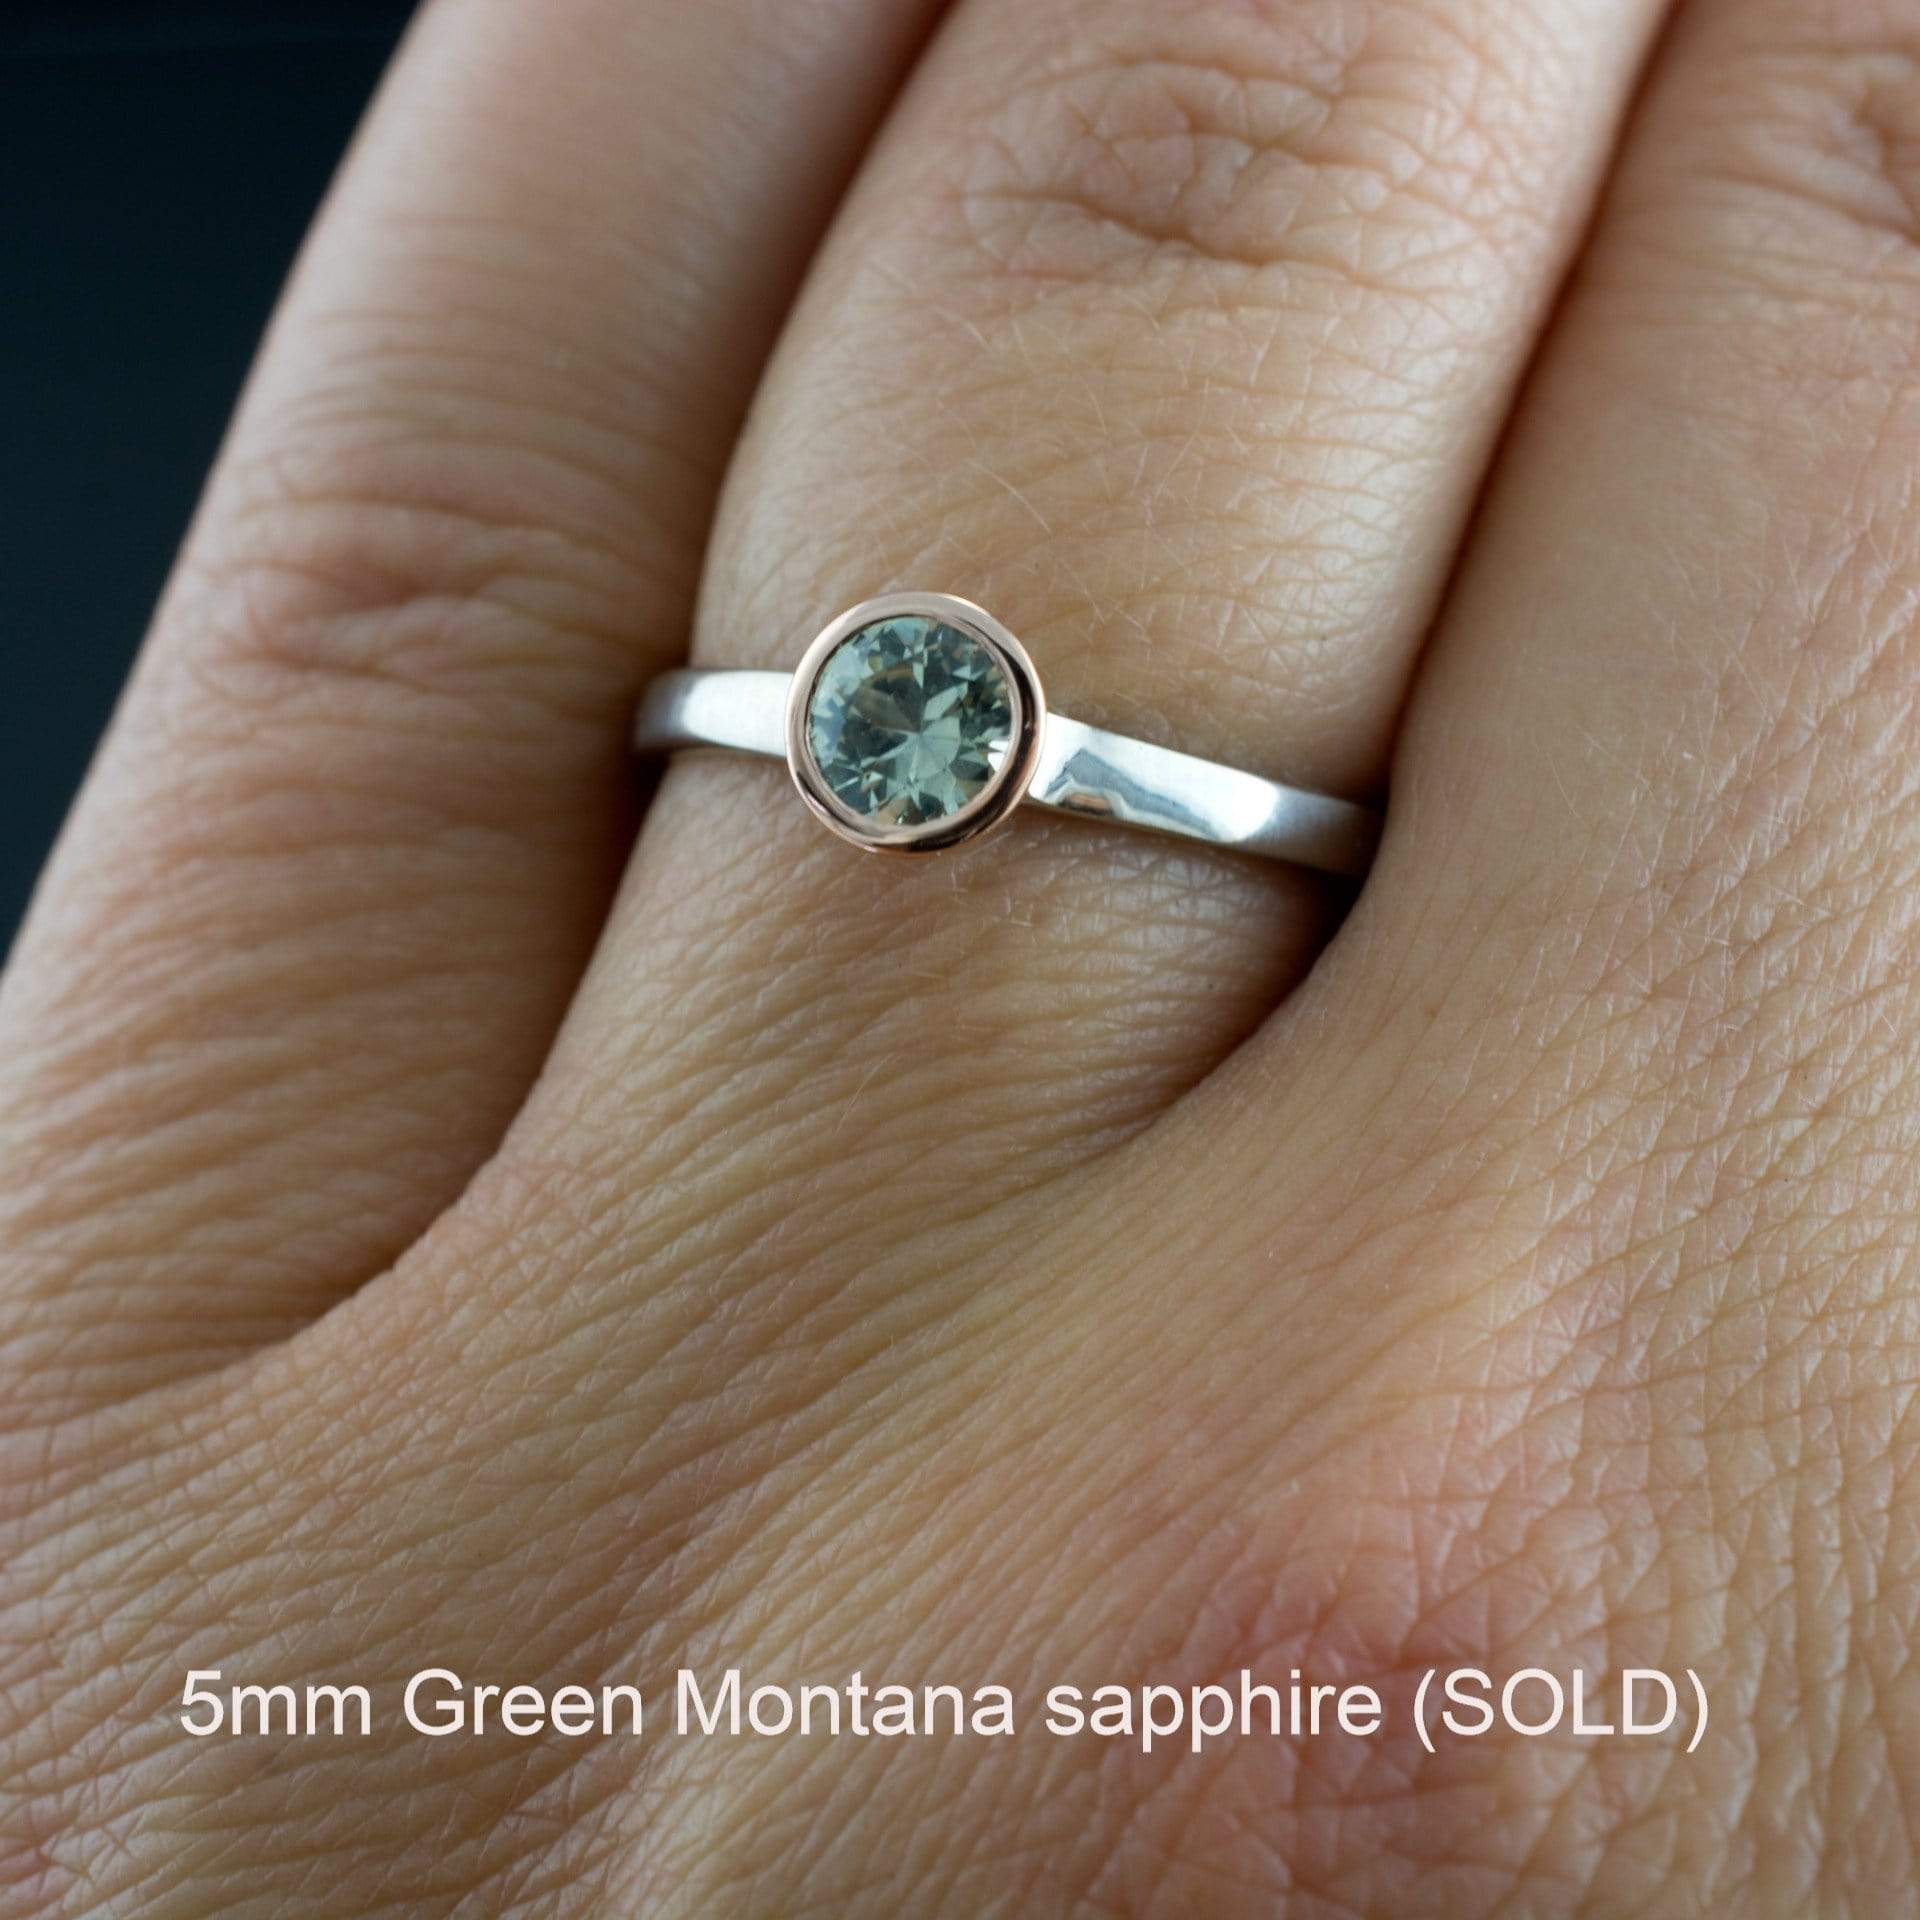 Mixed Metal Fair Trade Creamy White Montana Sapphire Belinda Solitaire Engagement Ring Ring by Nodeform